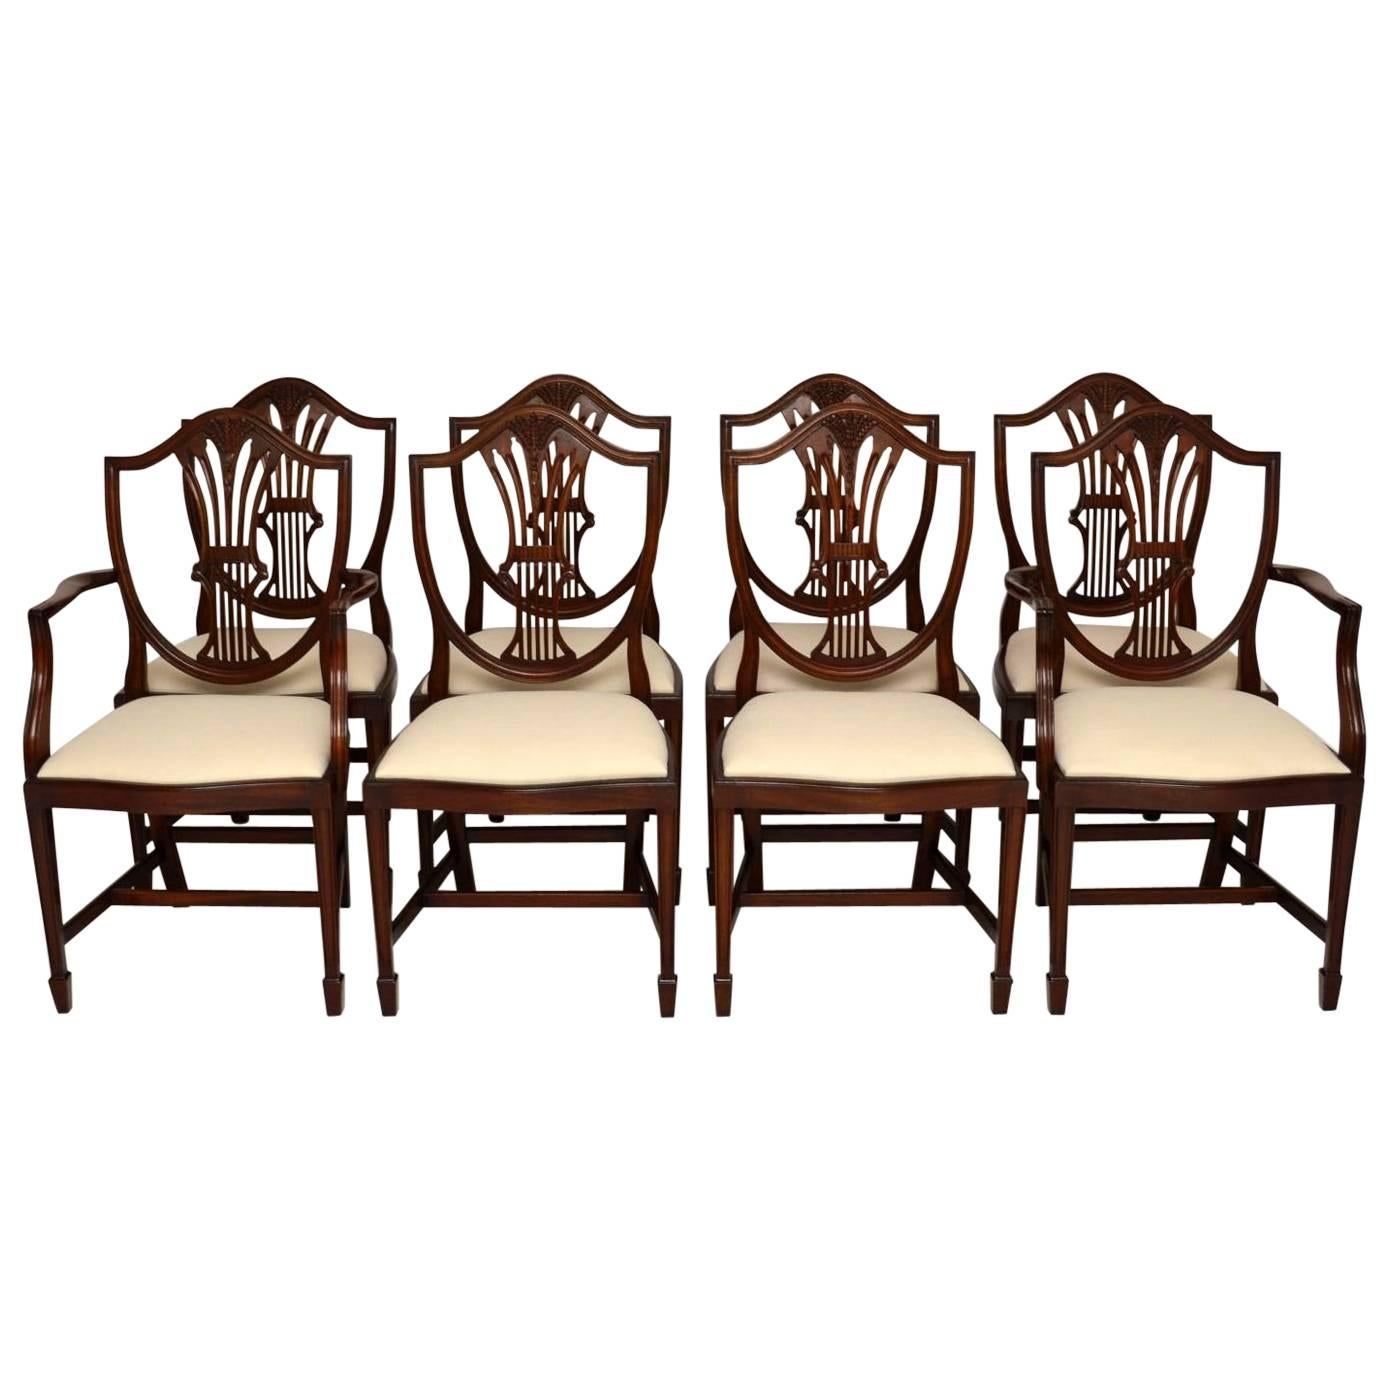 Set of Eight Antique Georgian Style Mahogany Dining Chairs